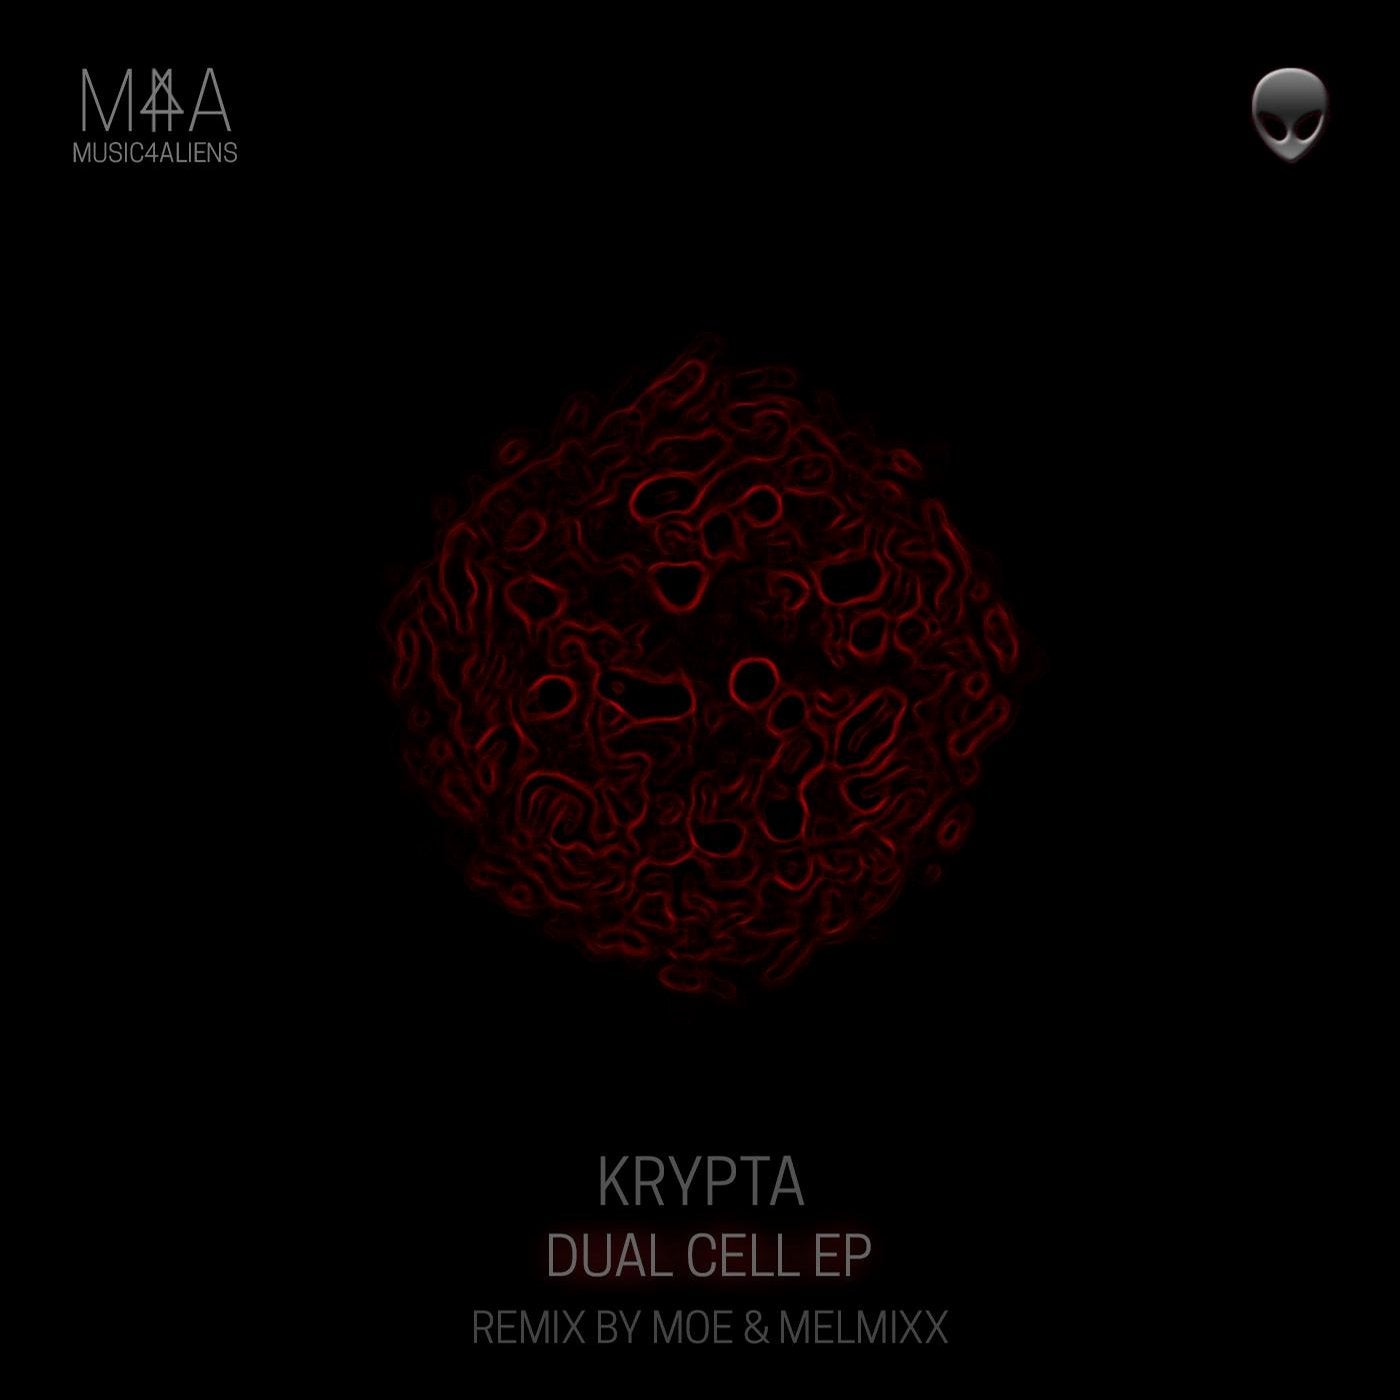 Dual Cell EP